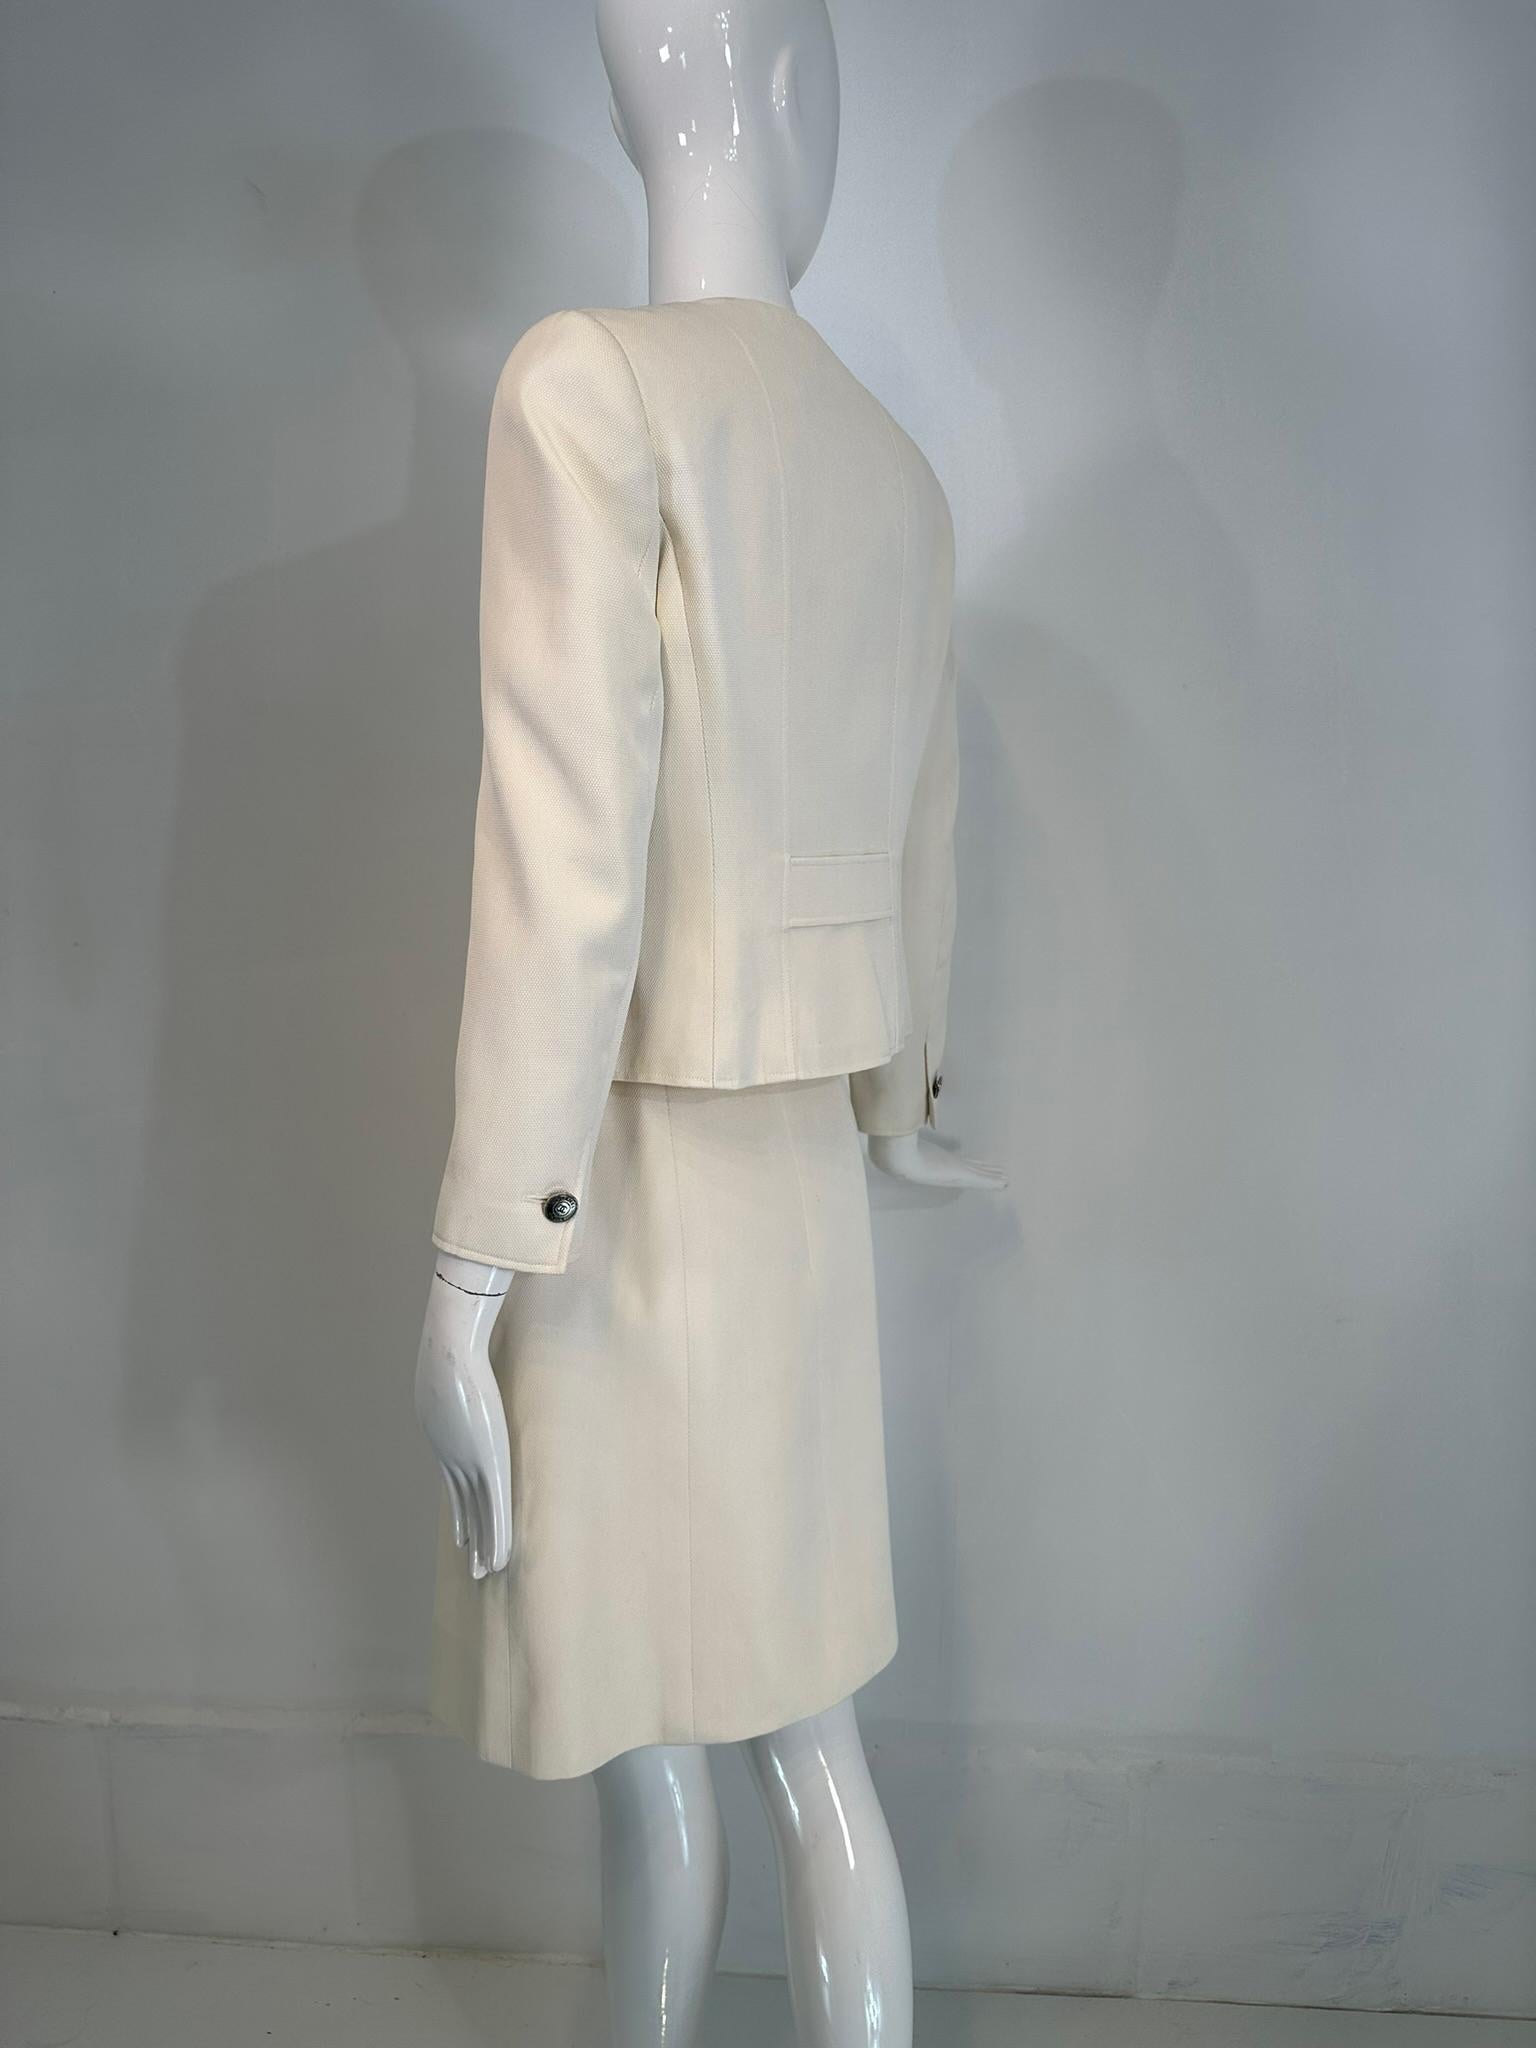 Chanel 1997 C Off White Cotton Pique Double Breasted Cropped Jacket & Skirt 40 For Sale 1